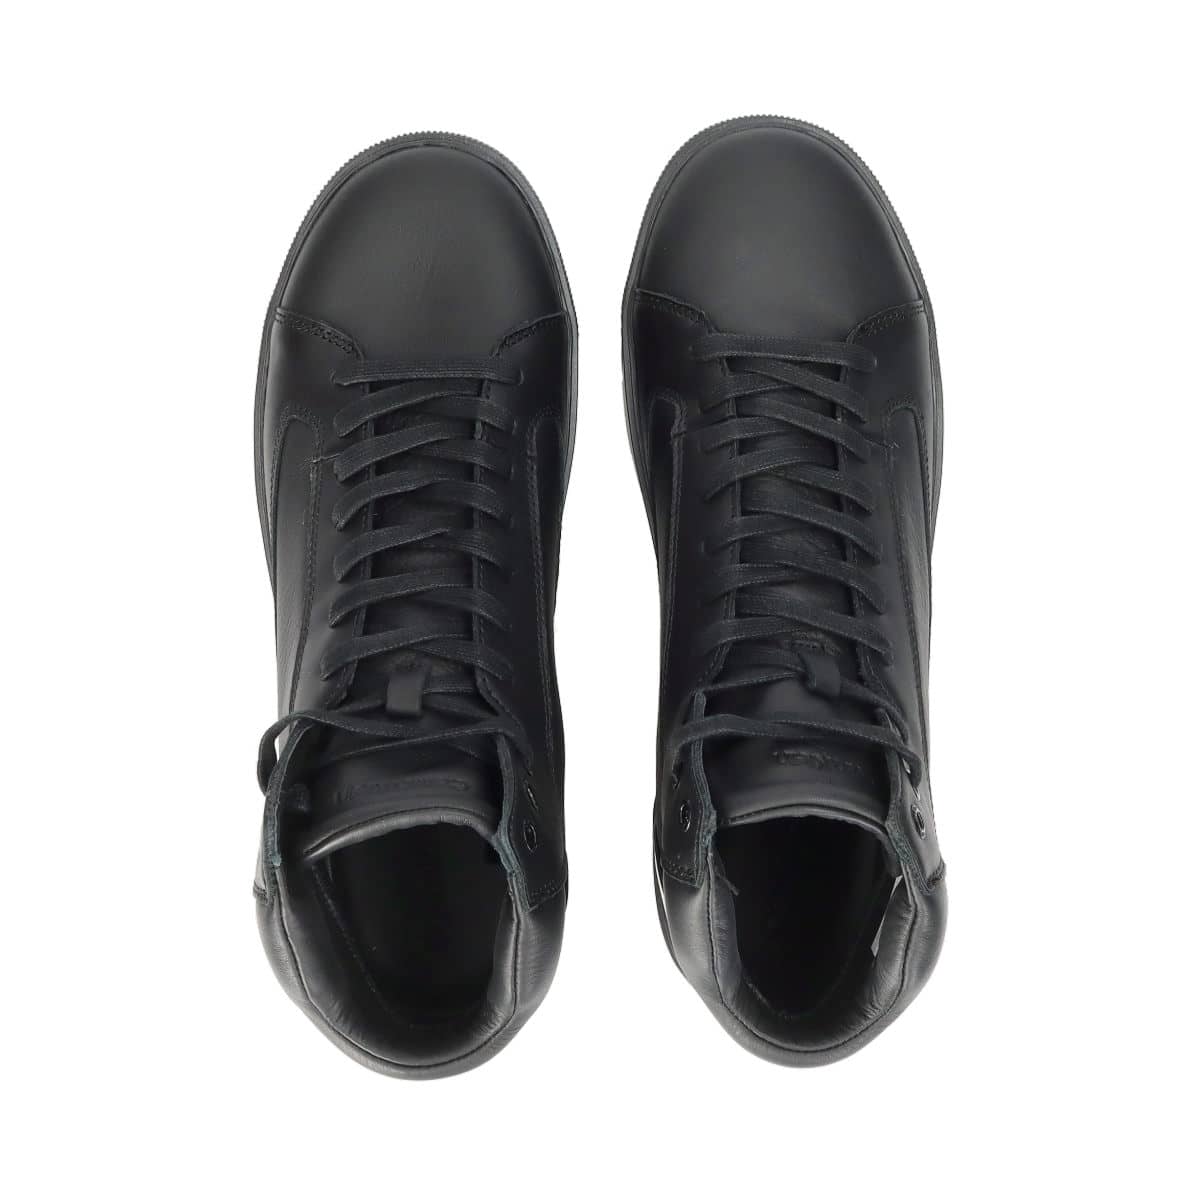 CALVIN KLEIN - HIGH TOP LACE UP INV STITCH Size 43